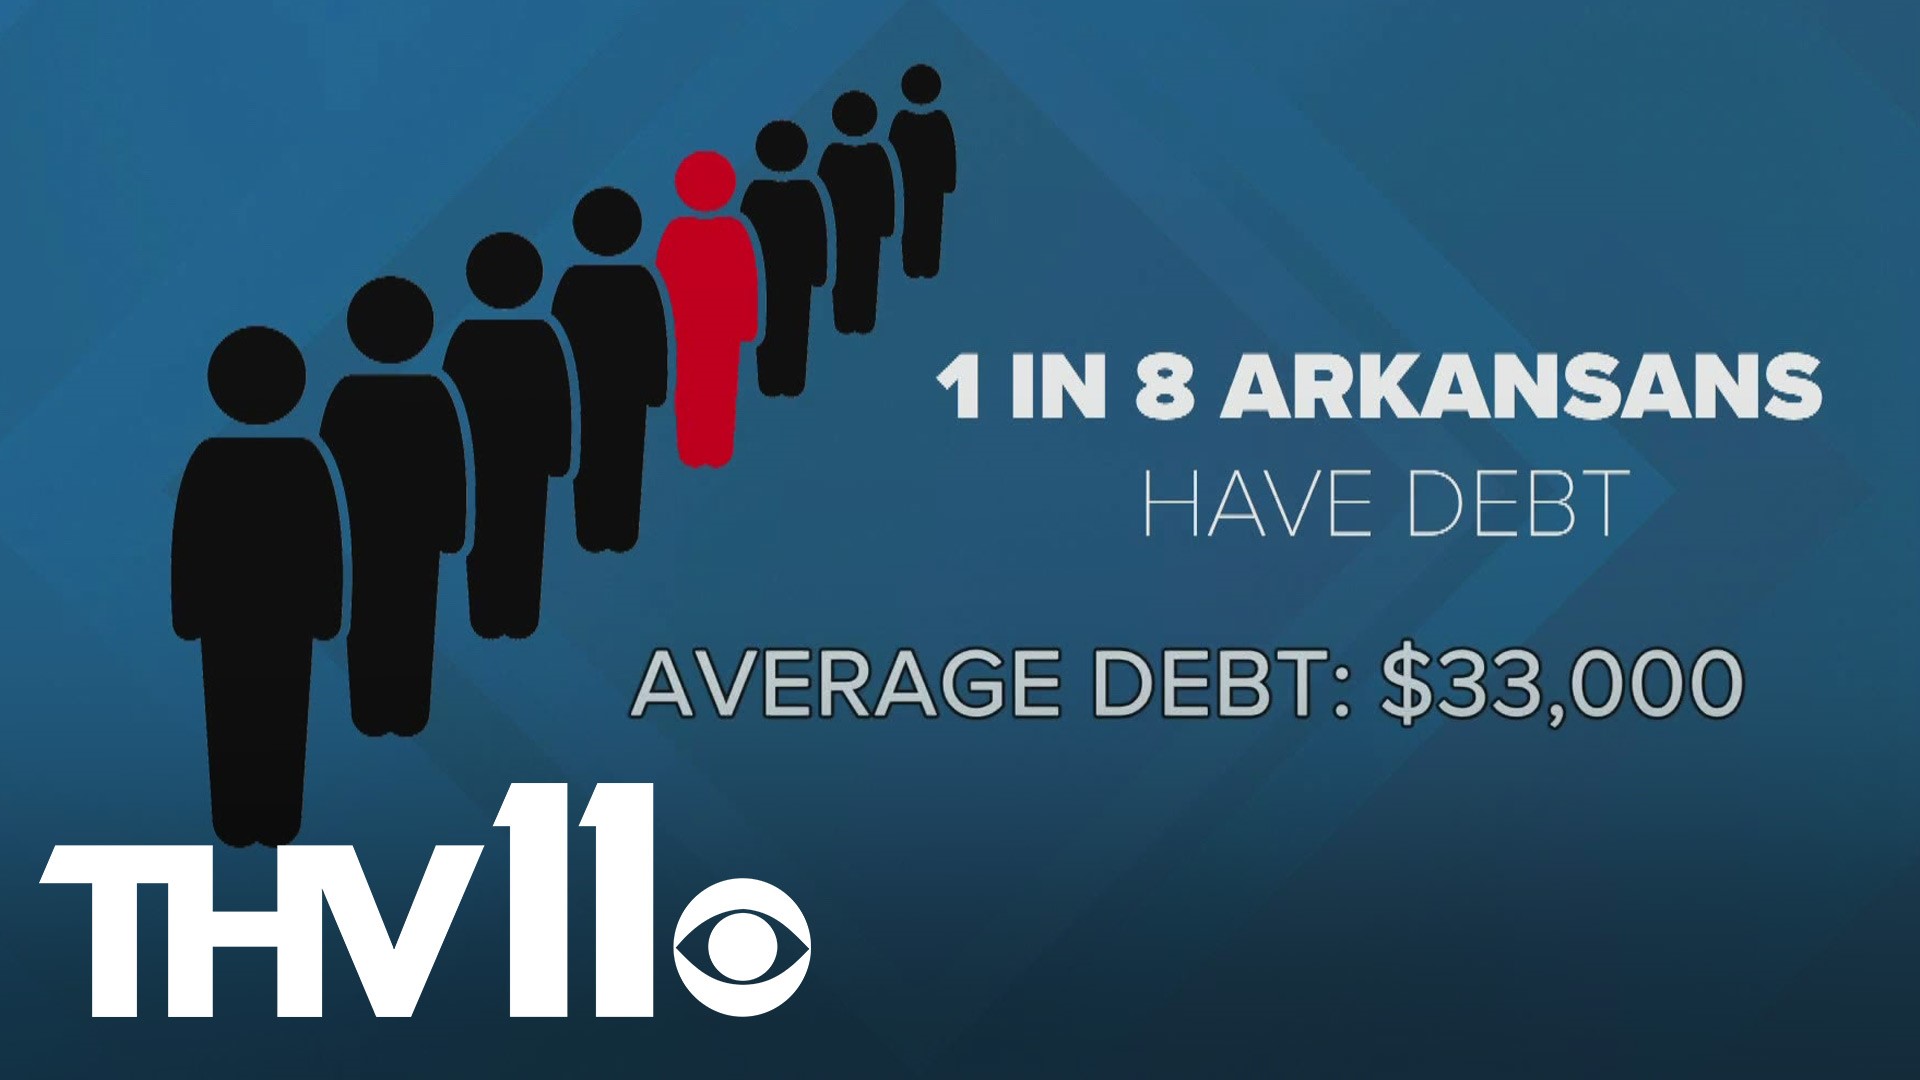 Some Arkansans are excited by the Democrats' plan to forgive $50,000 in student debt, but others have their reservations as well.